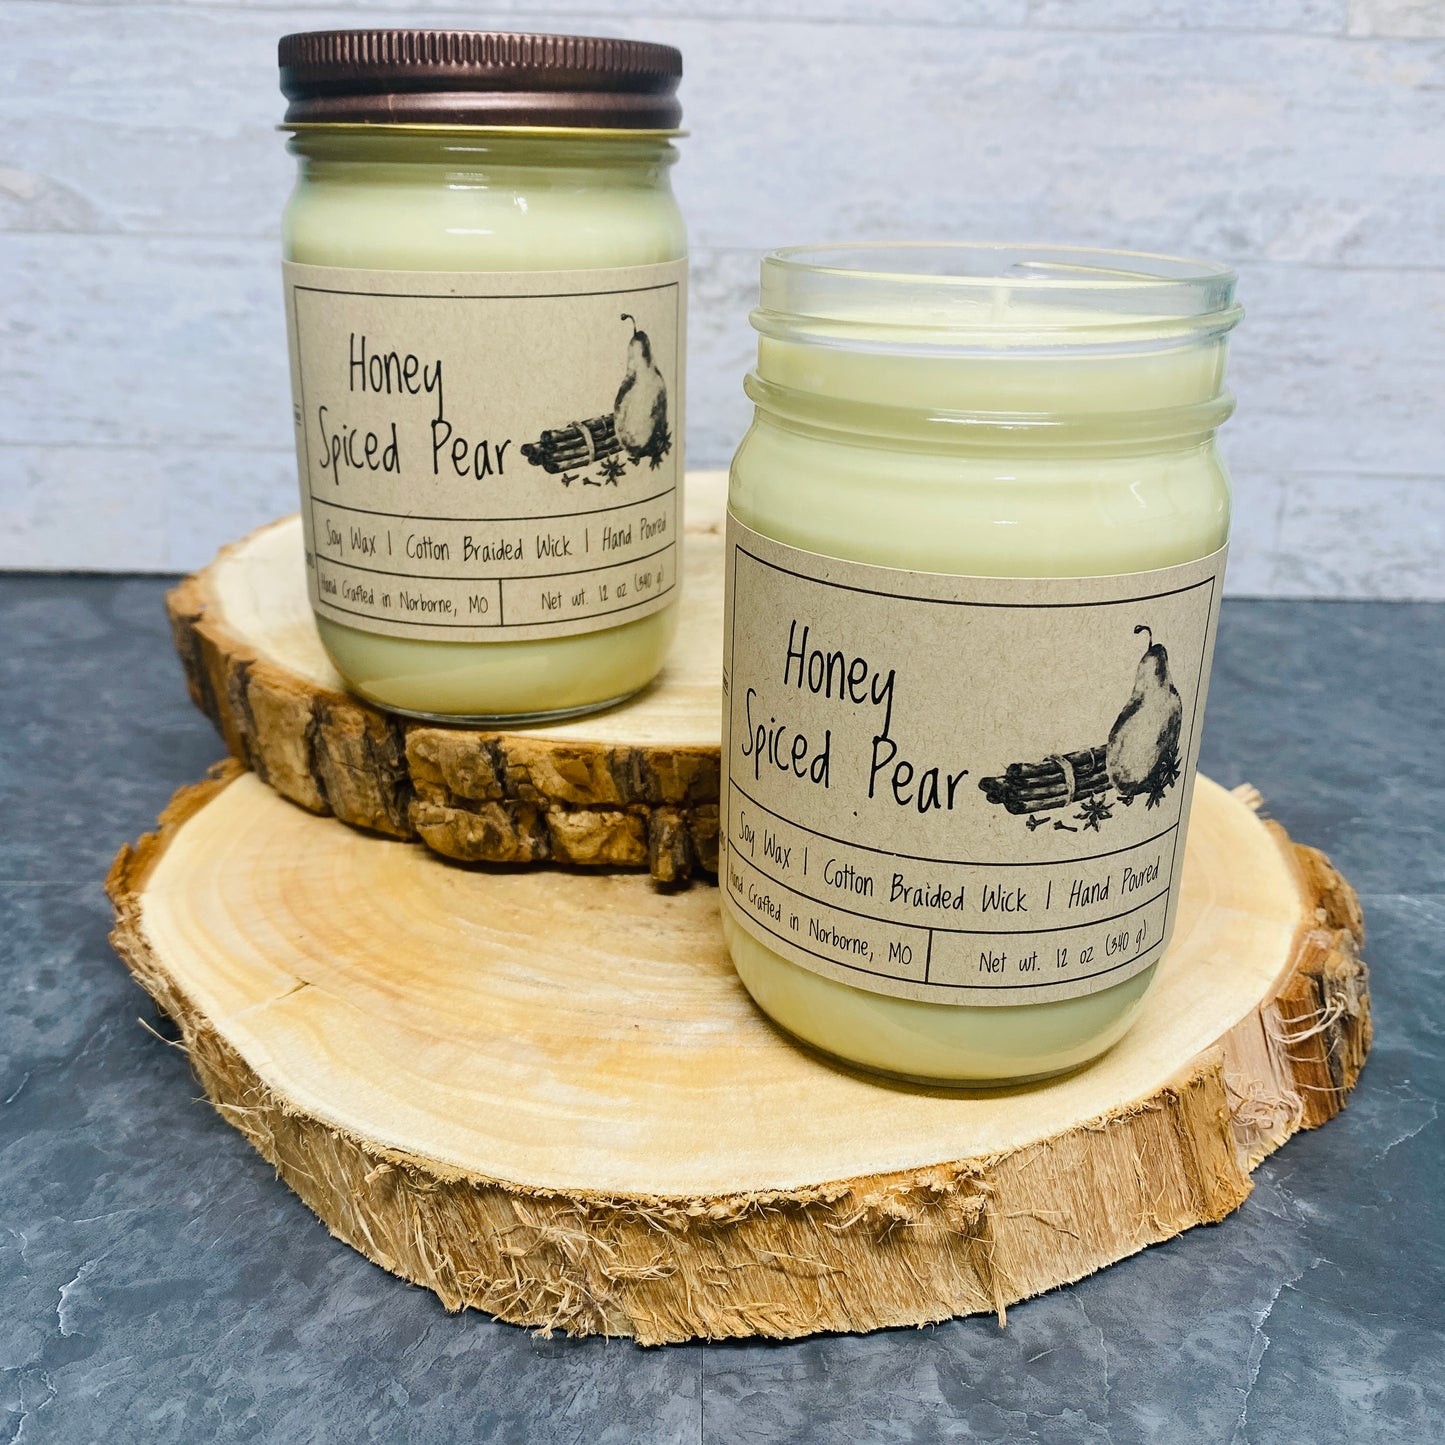 Honey Spiced Pear | Hand Poured Scented Soy Candle